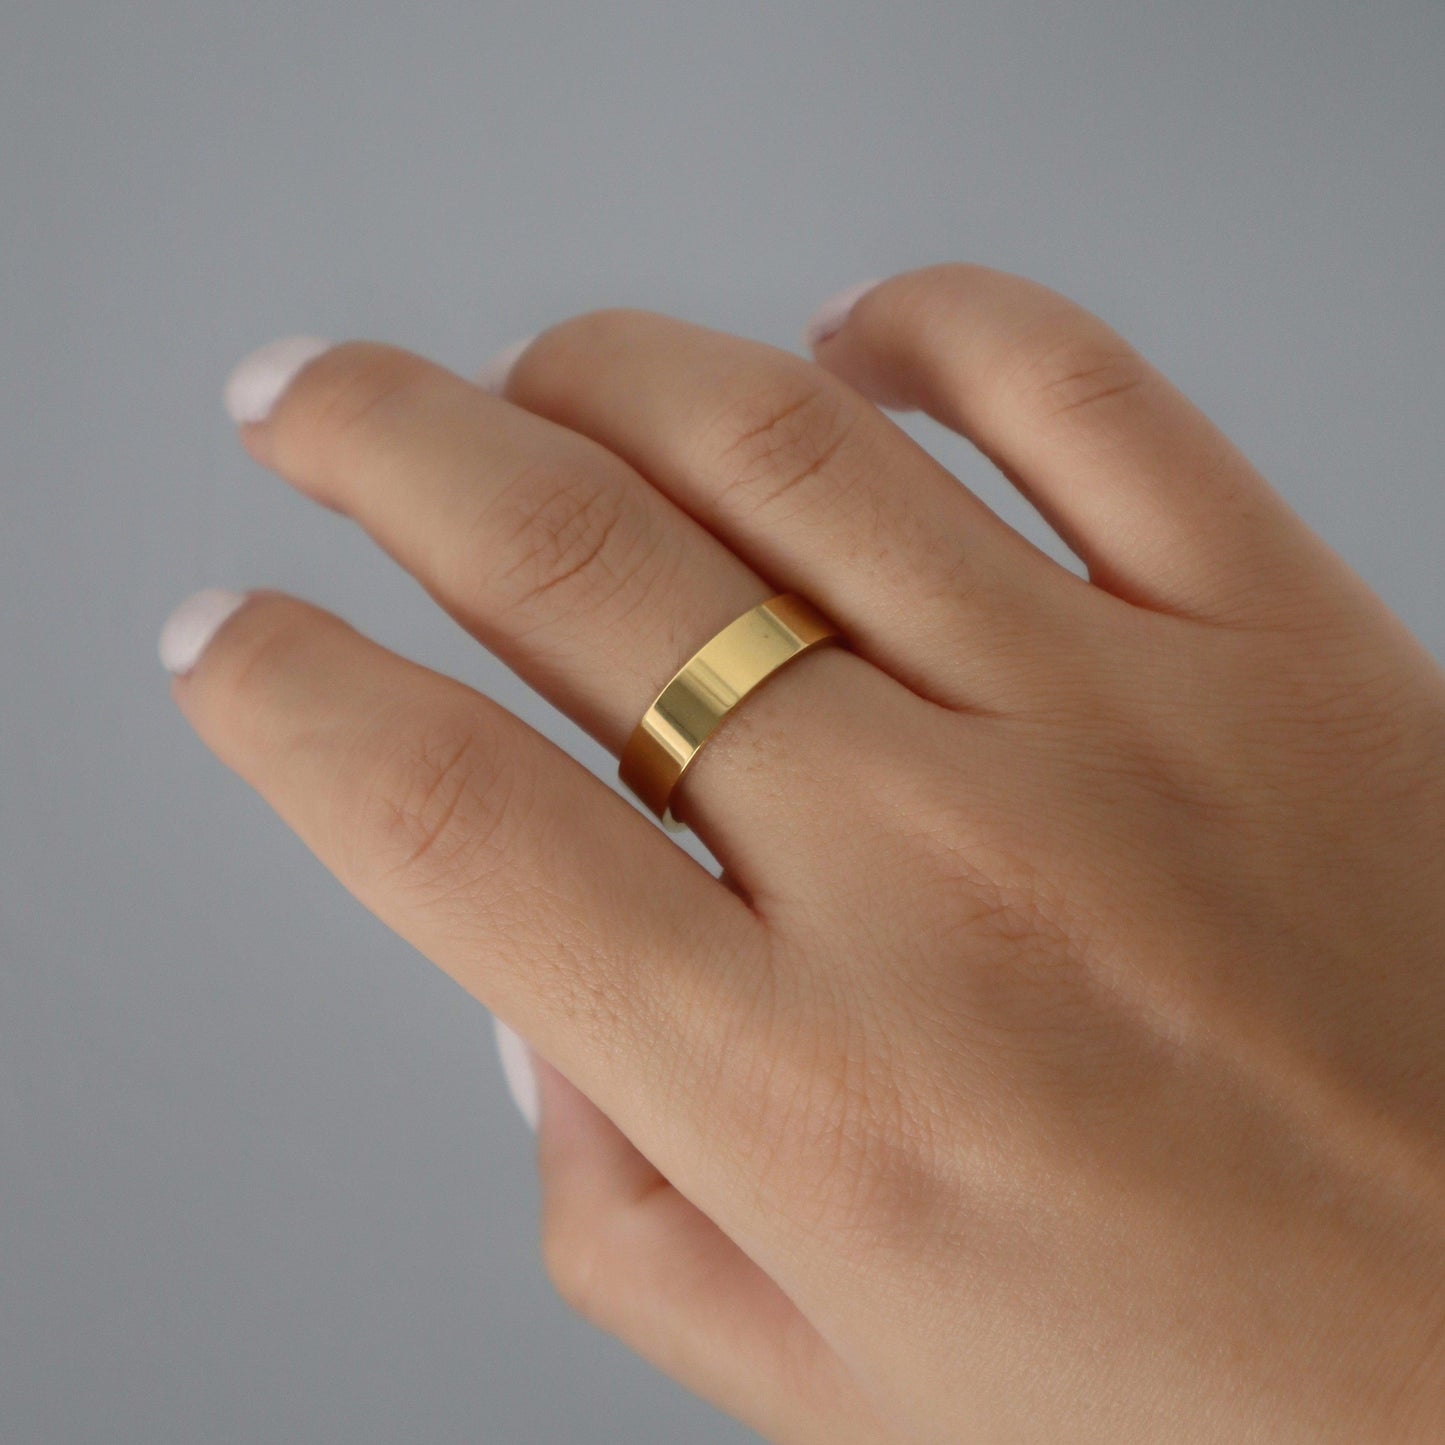 Cigar Ring - JESSA JEWELRY | GOLD JEWELRY; dainty, affordable gold everyday jewelry. Tarnish free, water-resistant, hypoallergenic. Jewelry for everyday wear